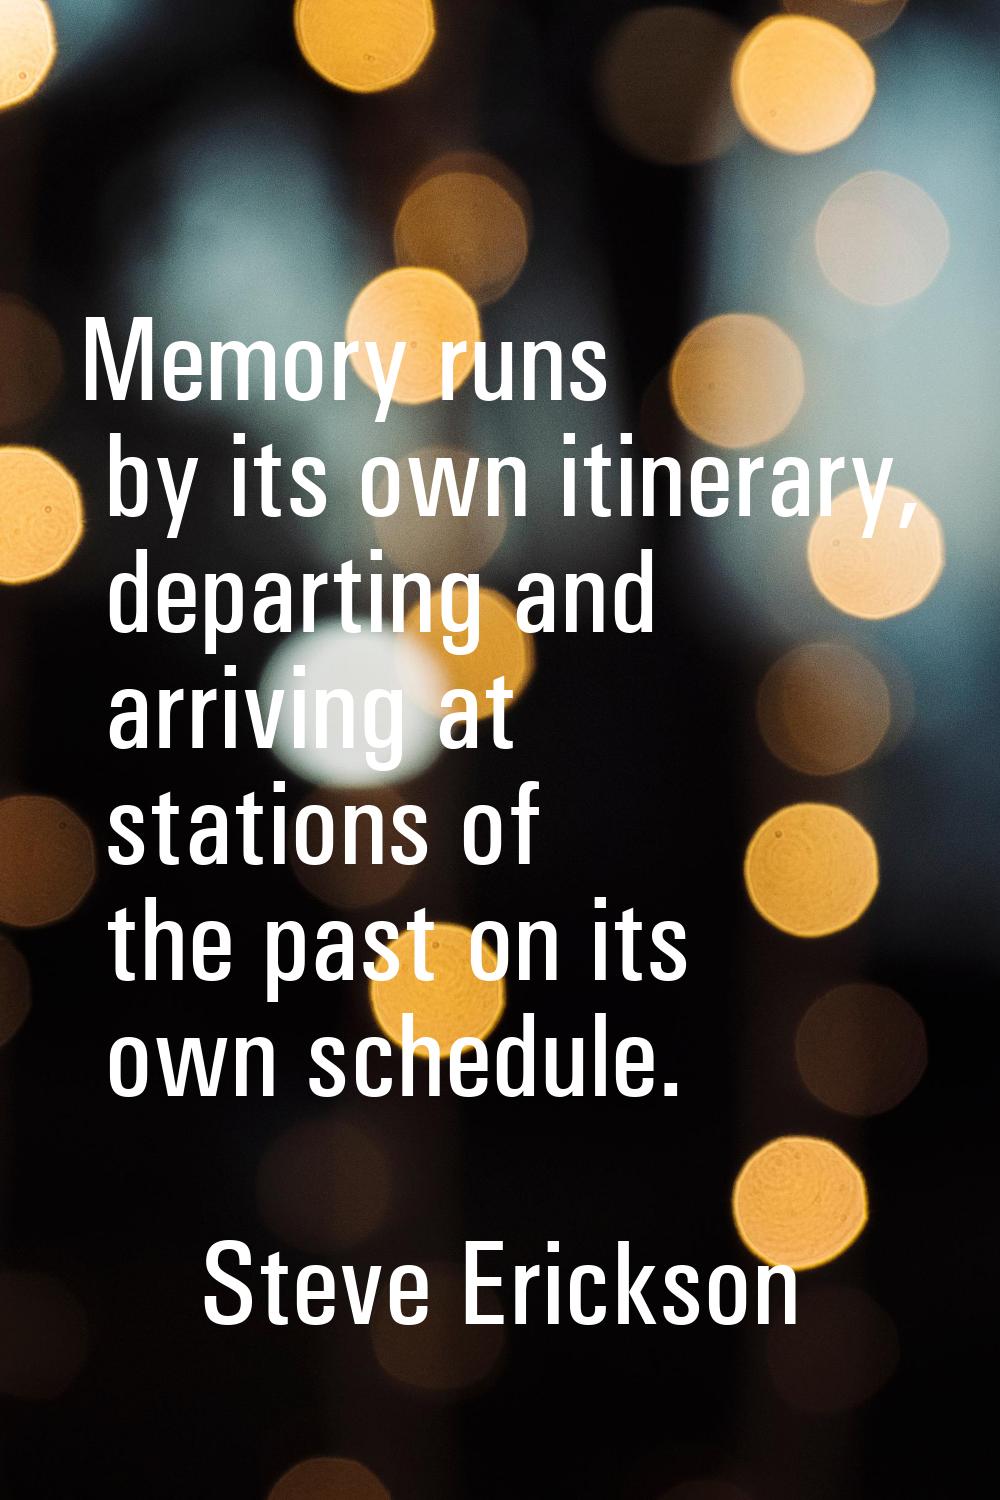 Memory runs by its own itinerary, departing and arriving at stations of the past on its own schedul